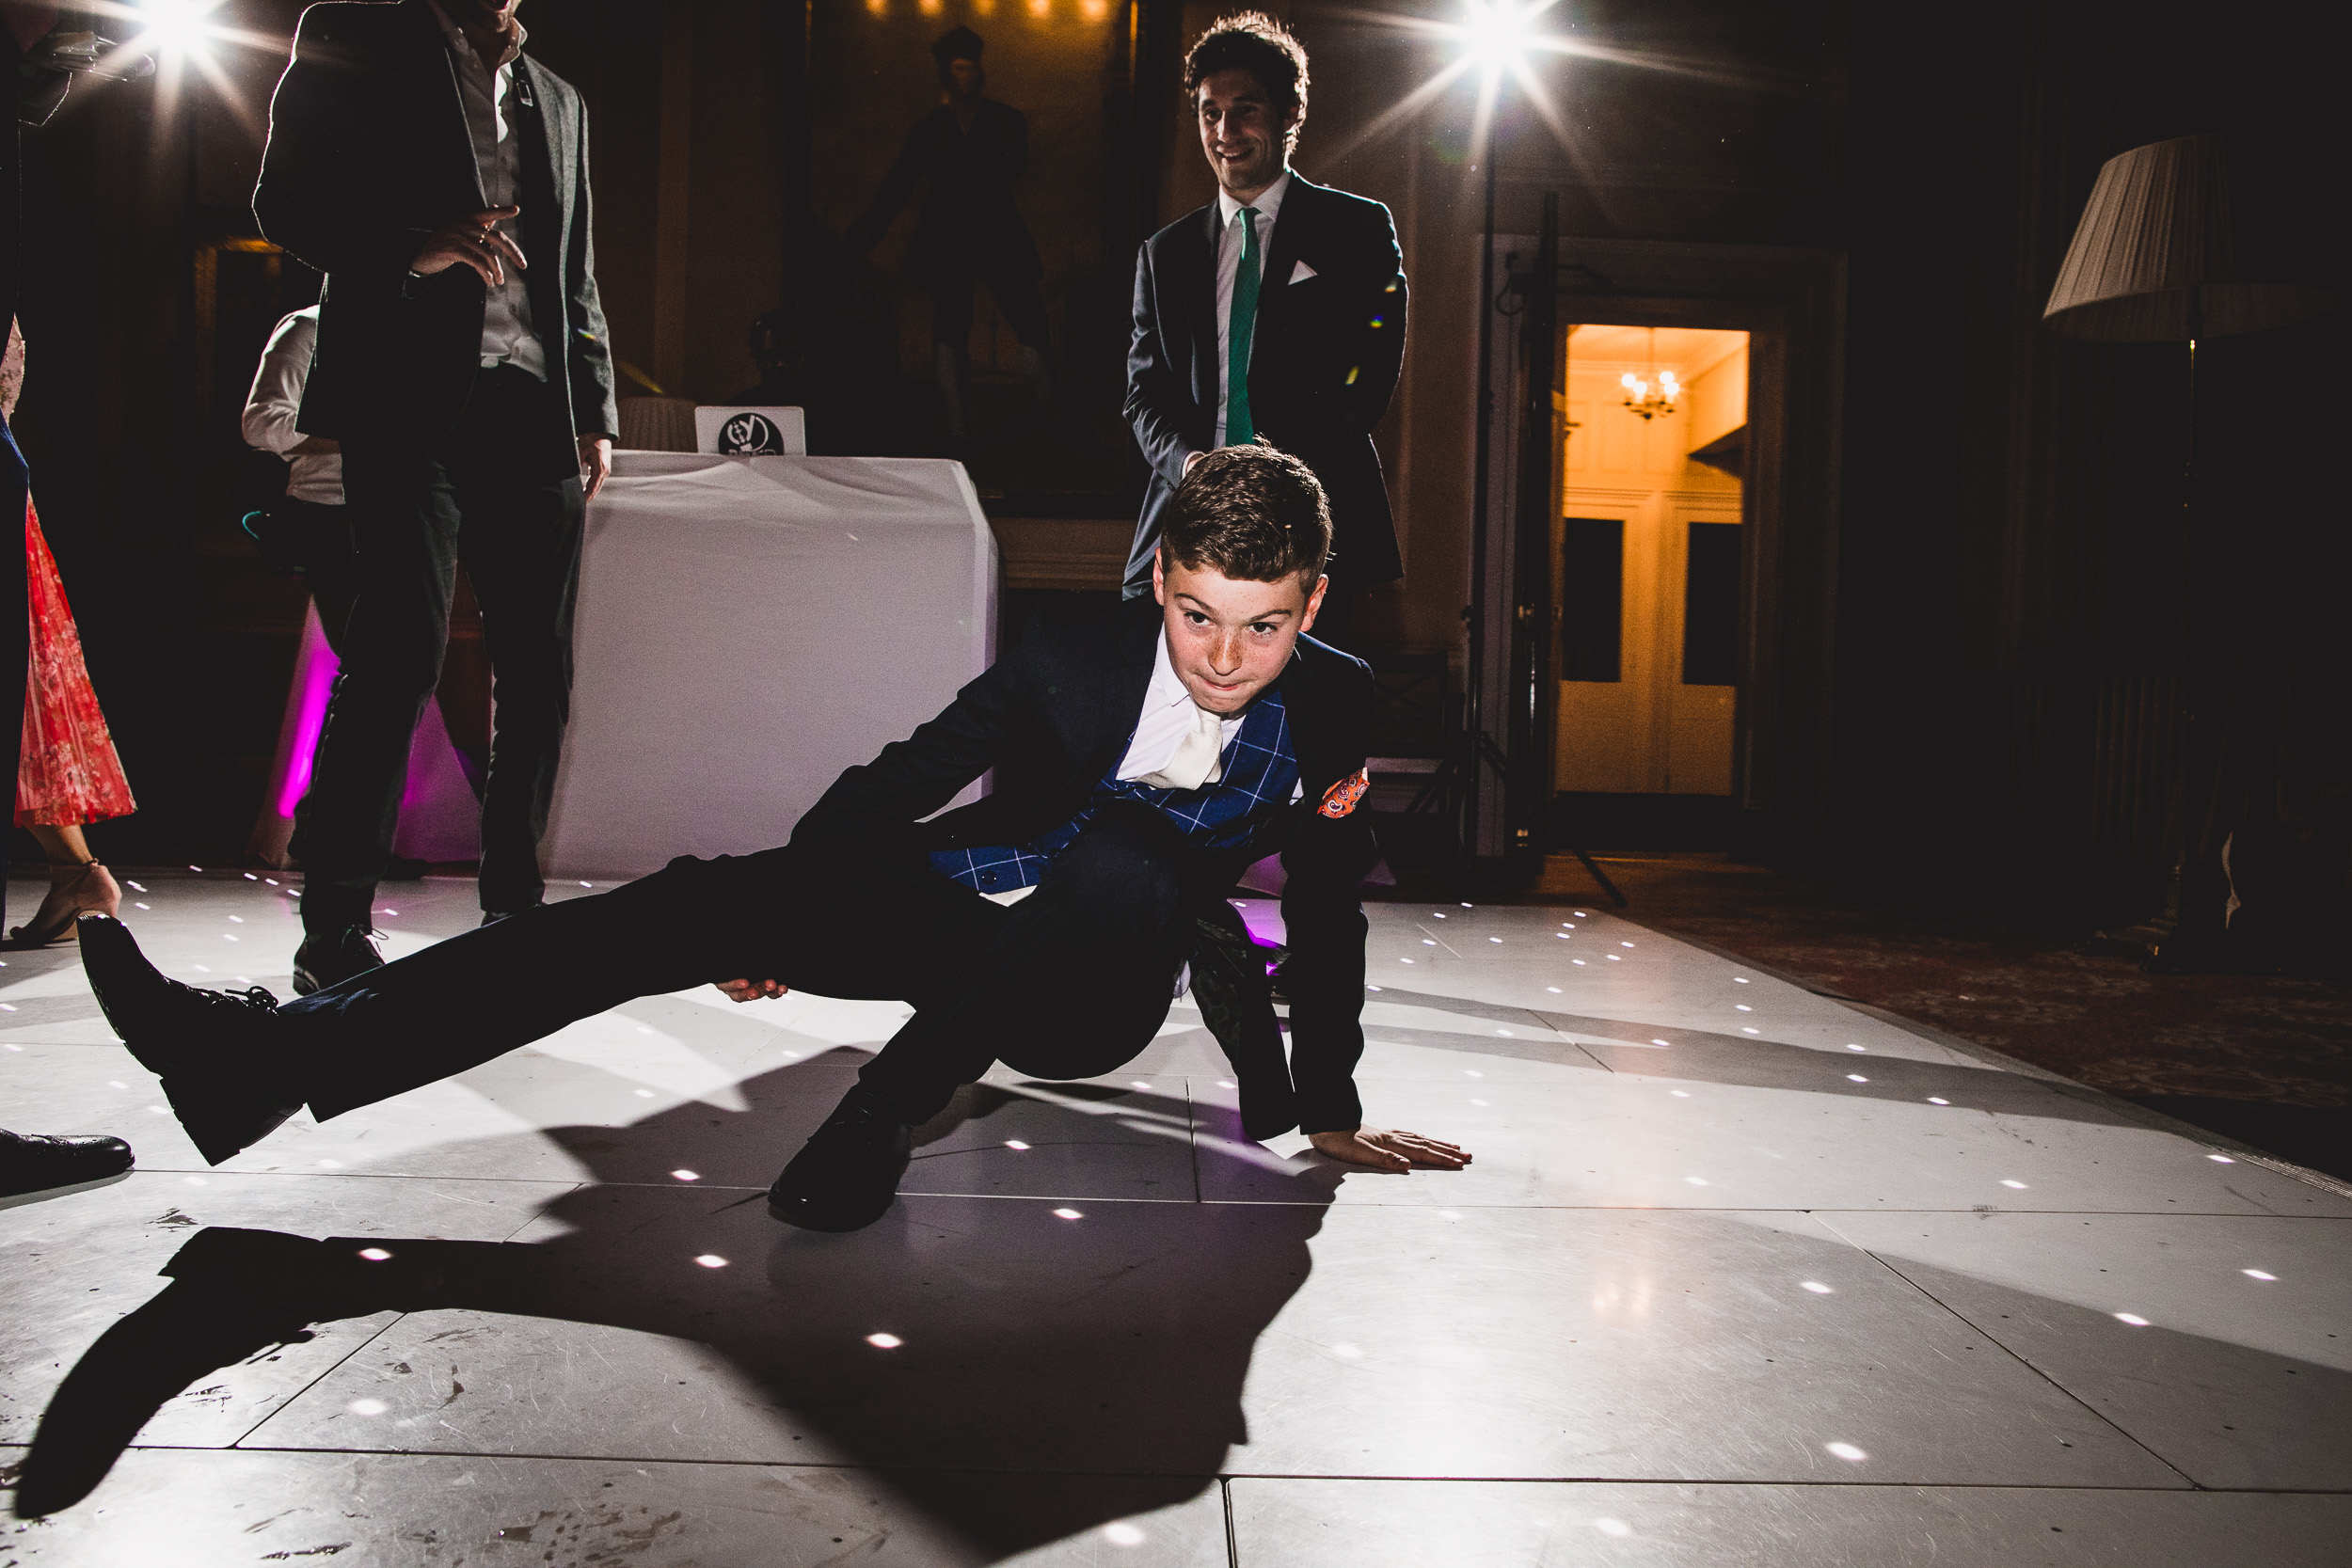 A man in a suit, captured by a wedding photographer, dancing on the wedding floor.